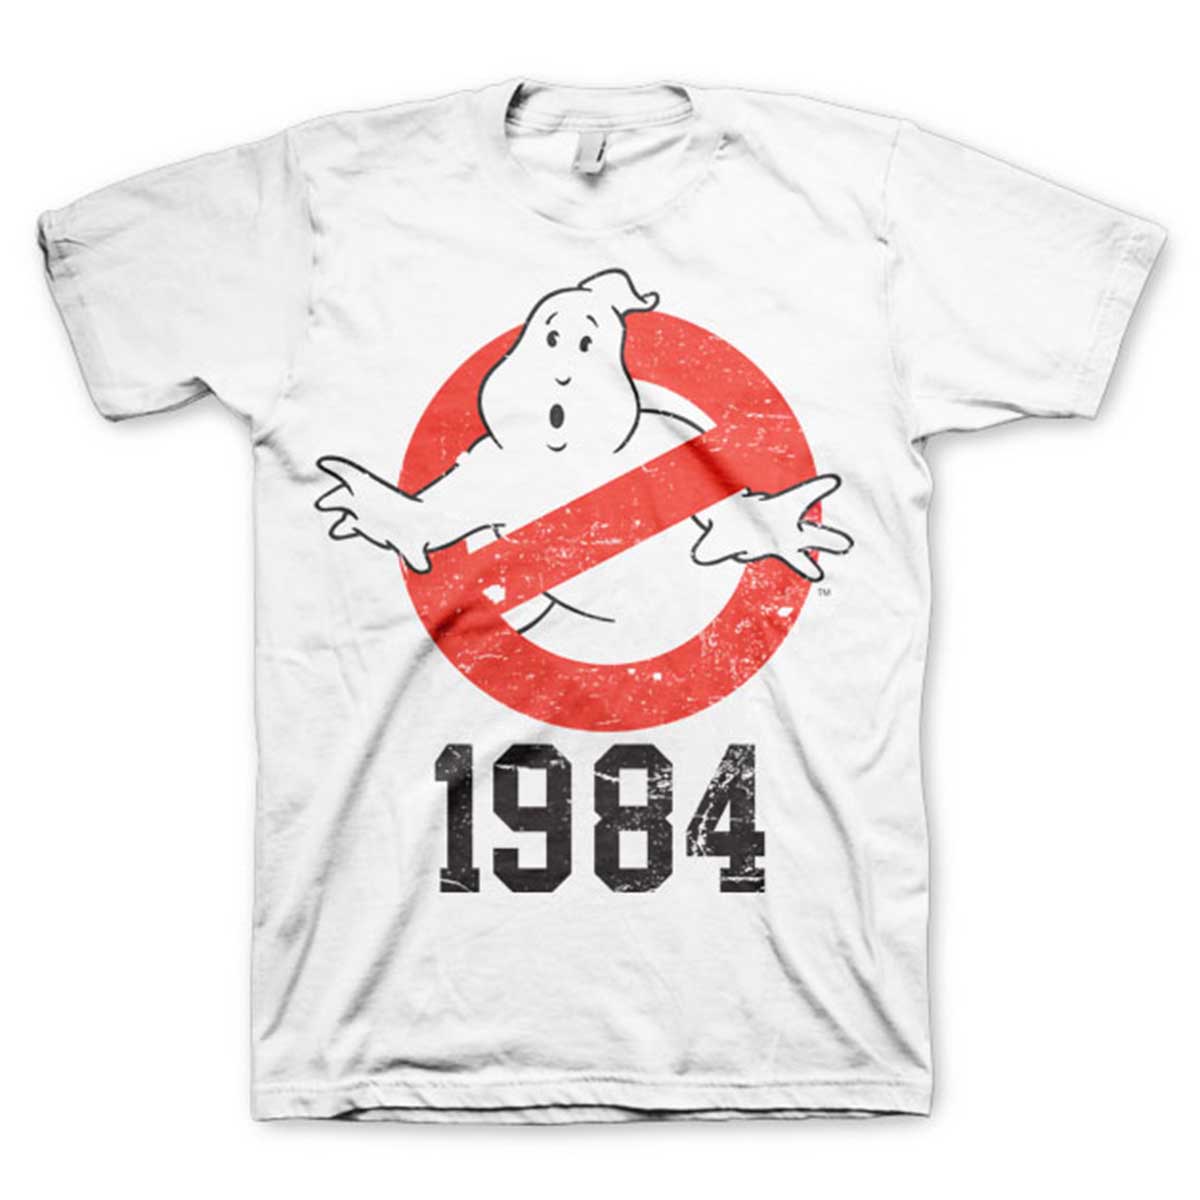 T-shirt Ghostbusters 1984 L